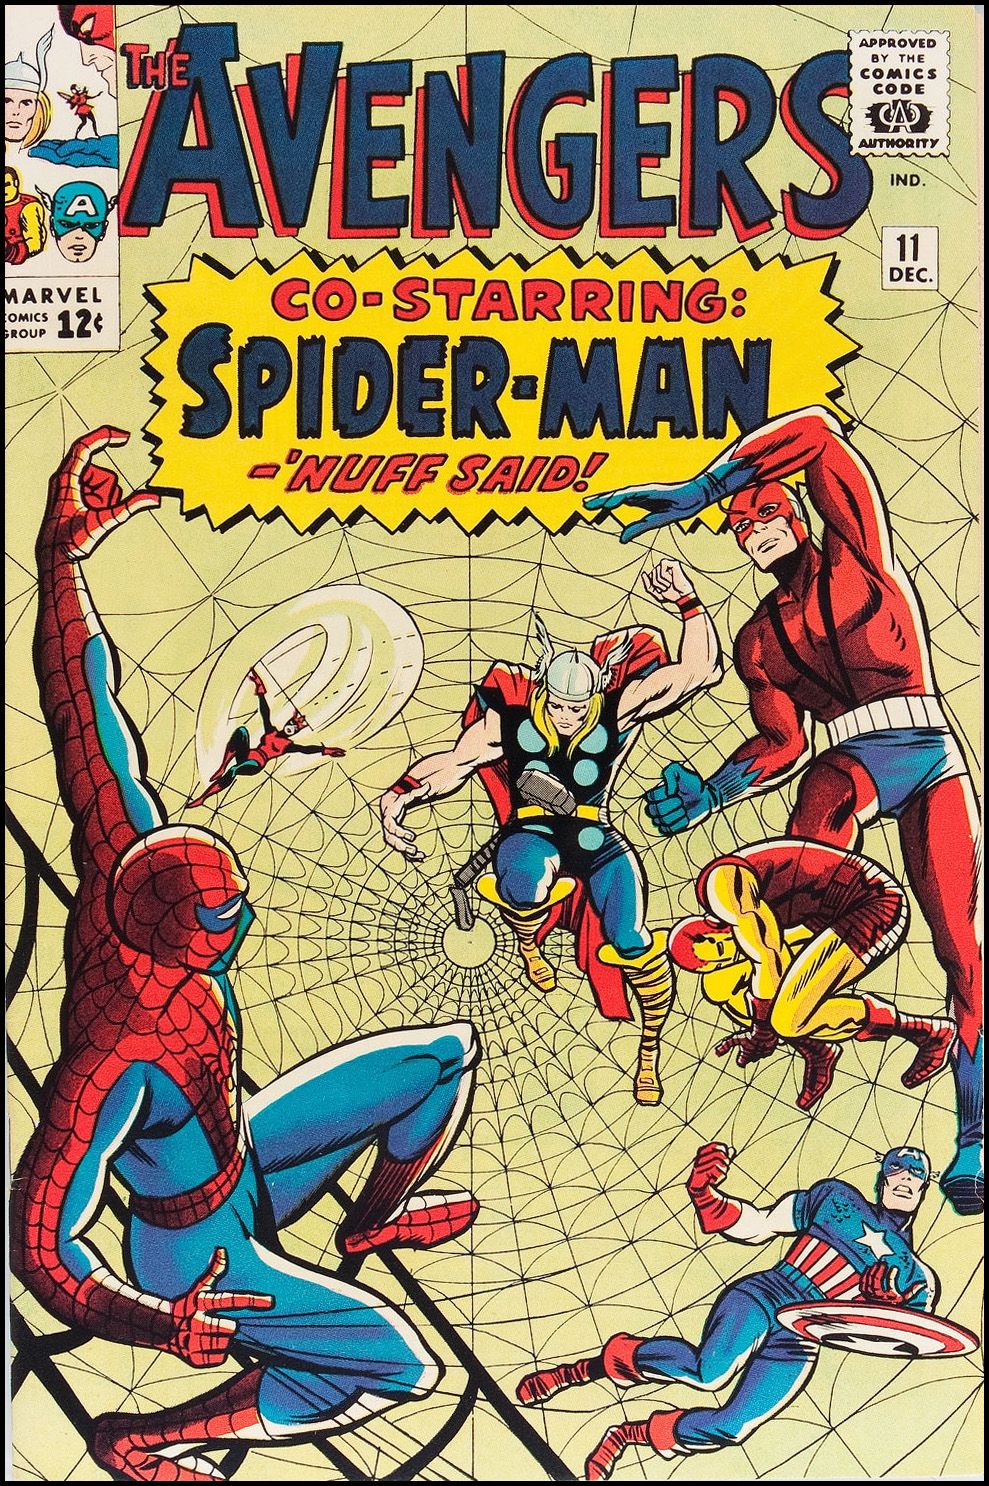 10 Greatest Spider-Man Covers of the 1960's - Brooklyn Comic Shop